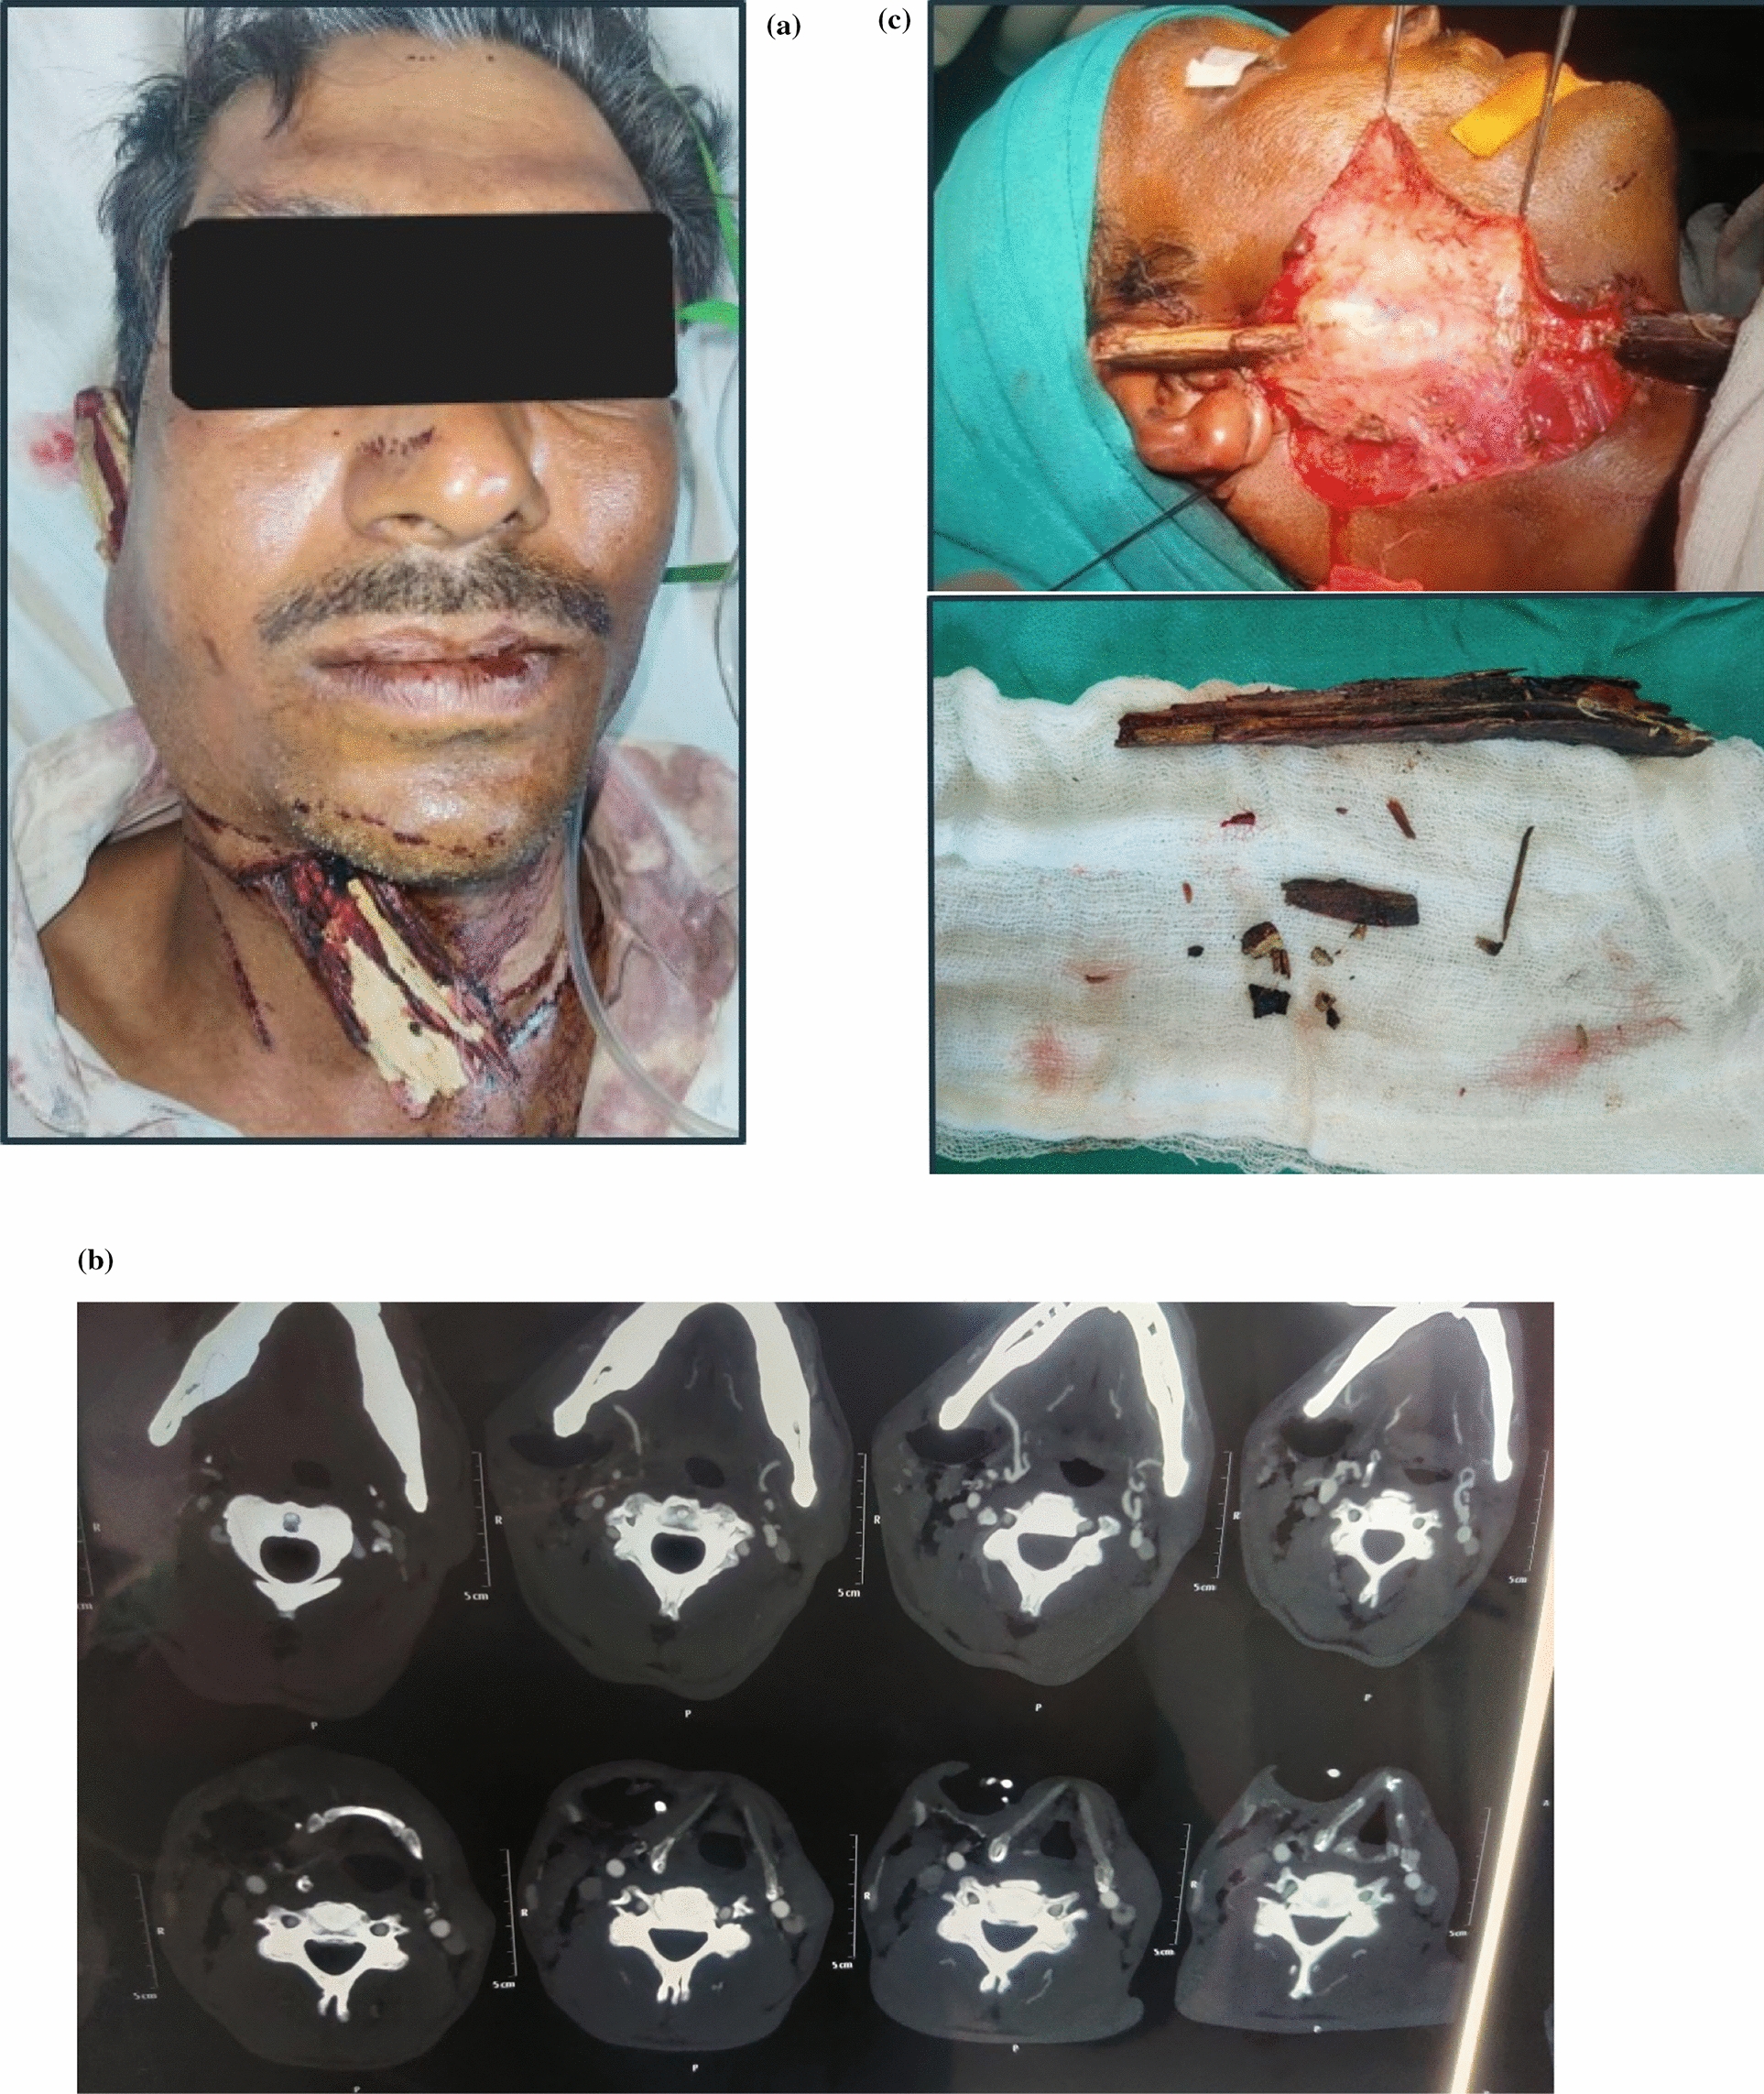 Complex-Type Foreign Body Penetrating Injuries of the Craniofacial Region and Surgical Management: A Report of Three Cases